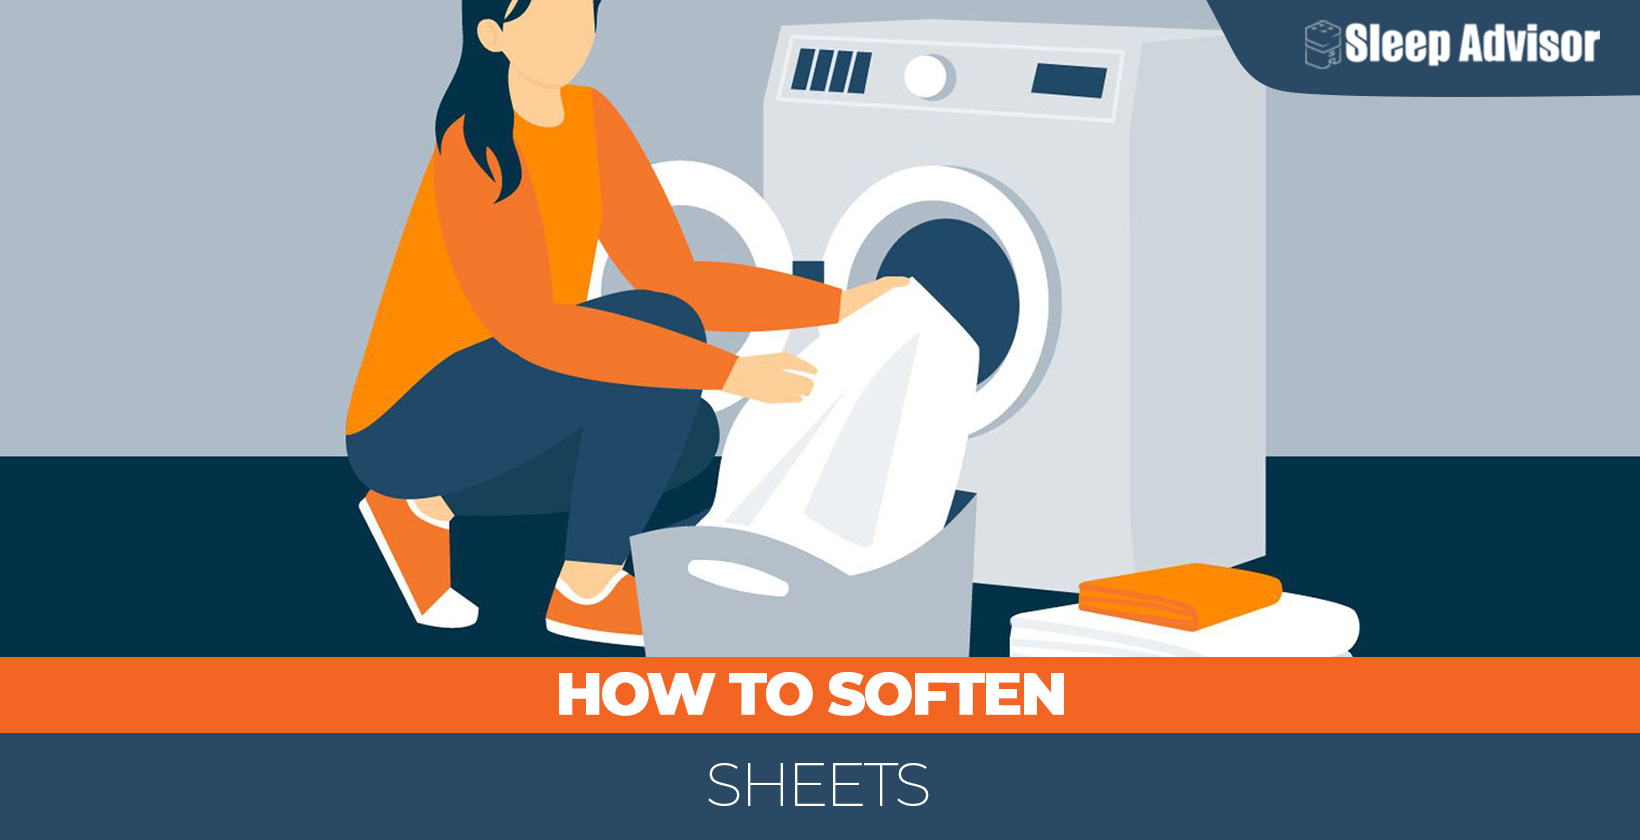 How to soften sheets1640x840px